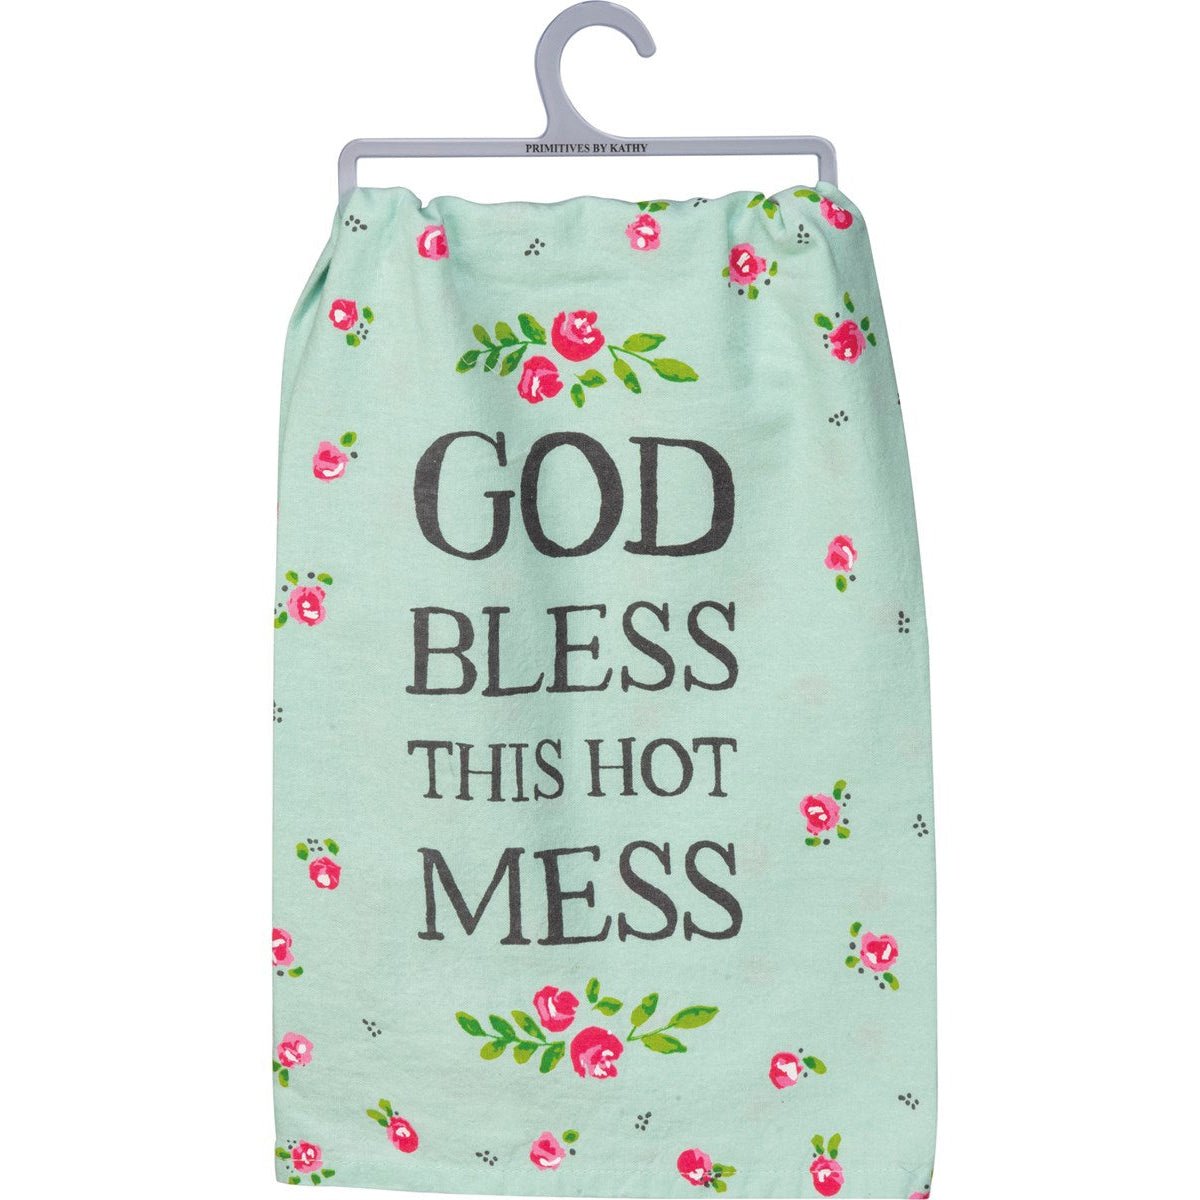 God Bless This Hot Mess Bright Multicolored Funny Snarky Dish Cloth Towel / Novelty Silly Tea Towels / Cute Hilarious Farmhouse Kitchen Hand Towel